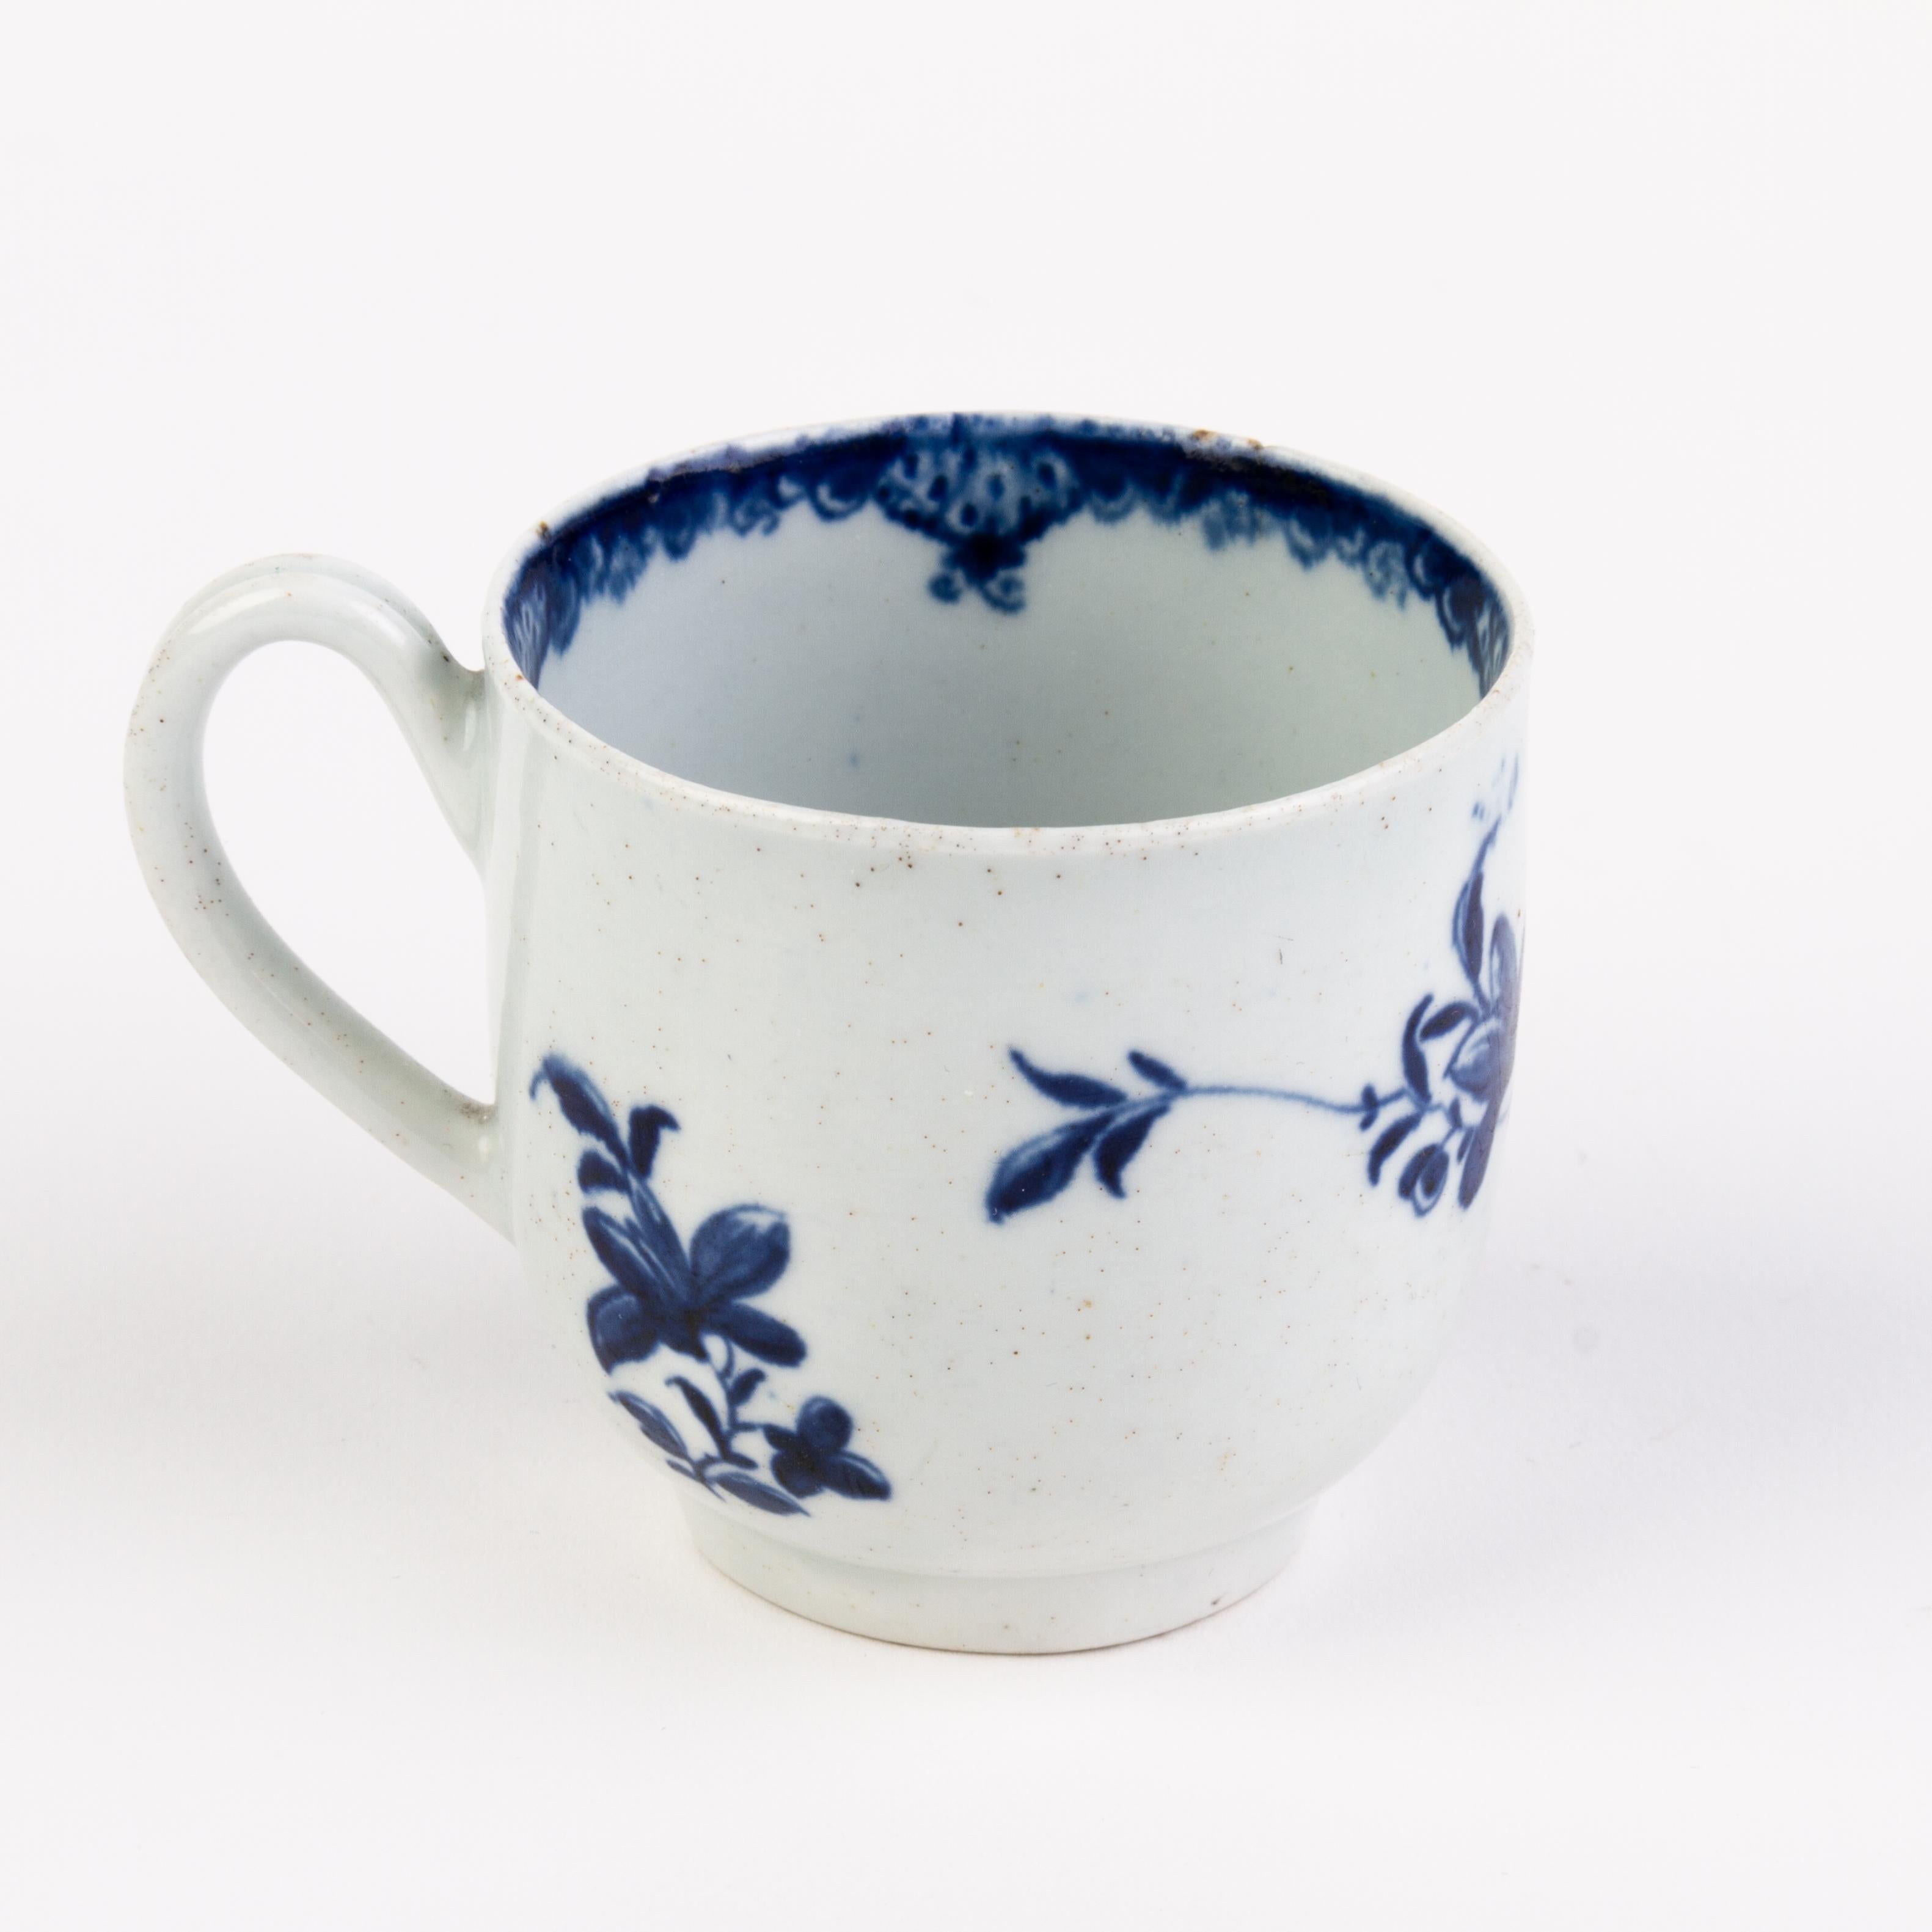 Hand-Painted Late 18th Century Chinese Flowers Worcester Porcelain English Tea Cup For Sale